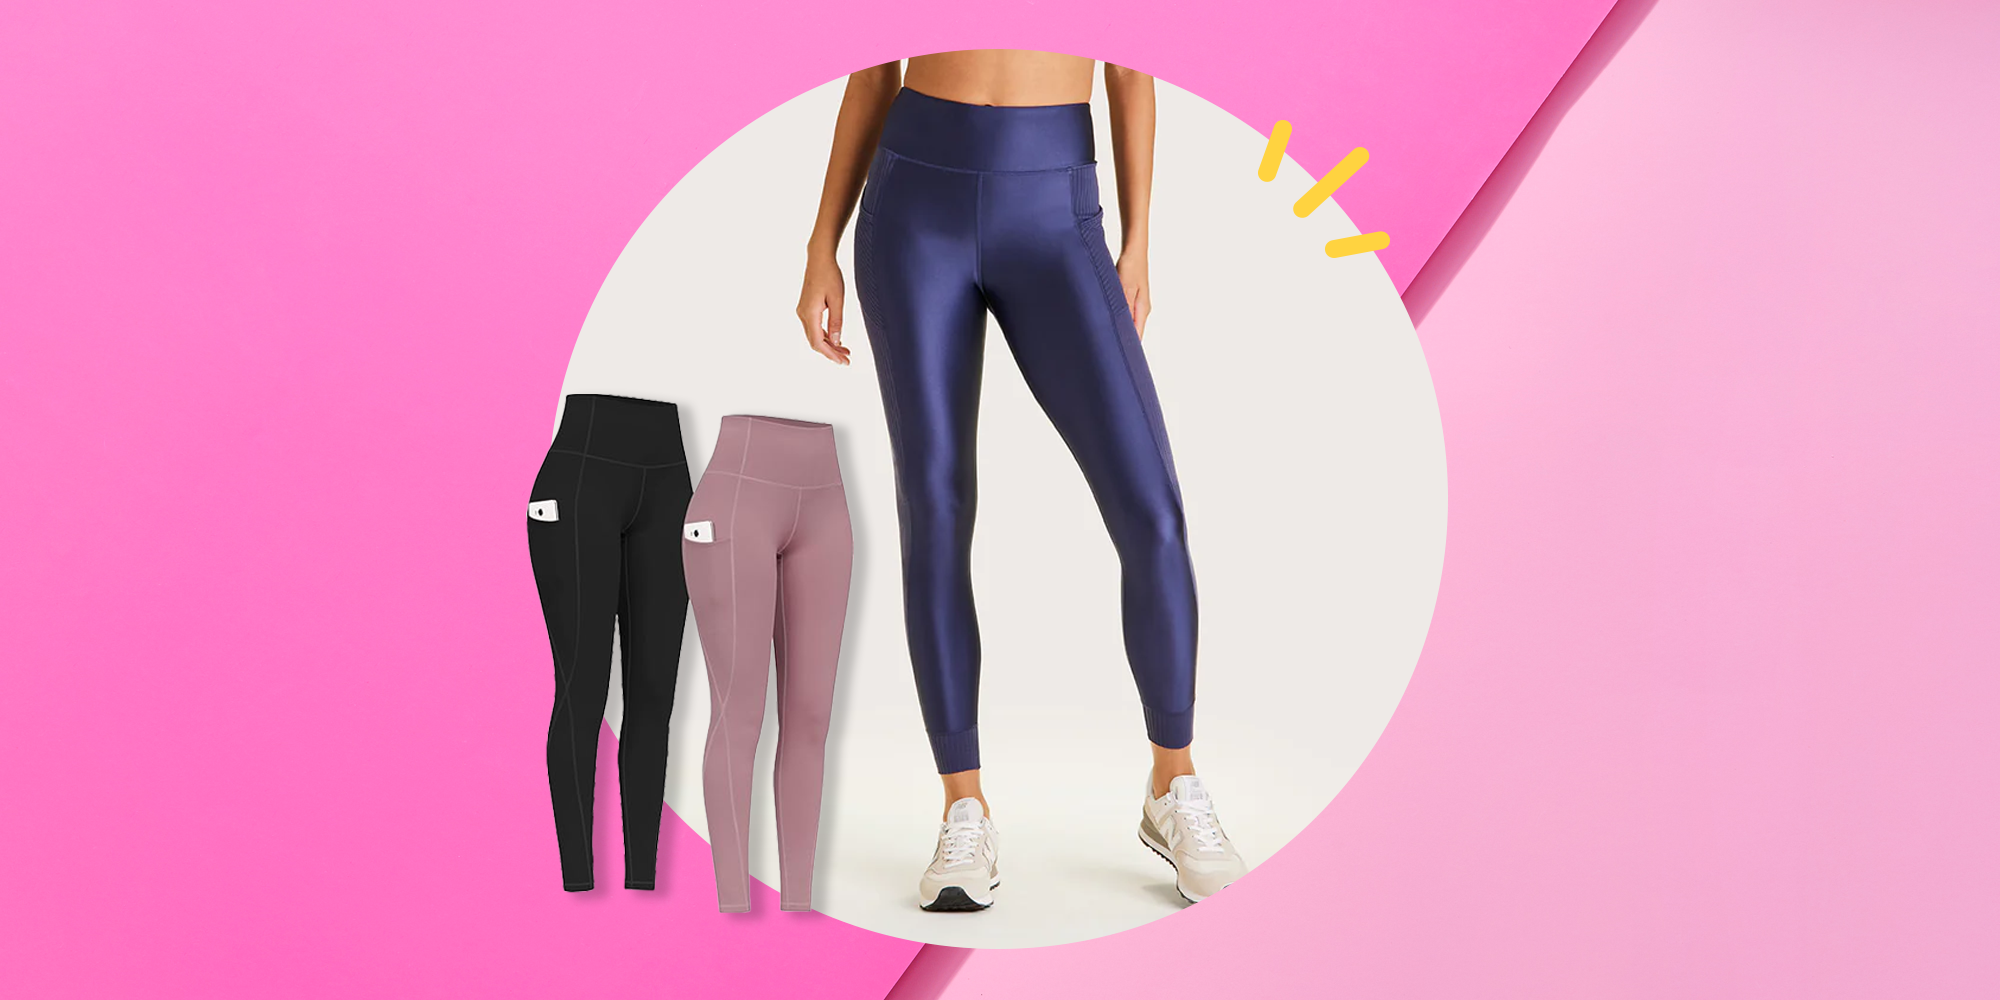 Bright Pink Soft Stretchable Cotton Stretch Legging Workout Yoga Full  Length